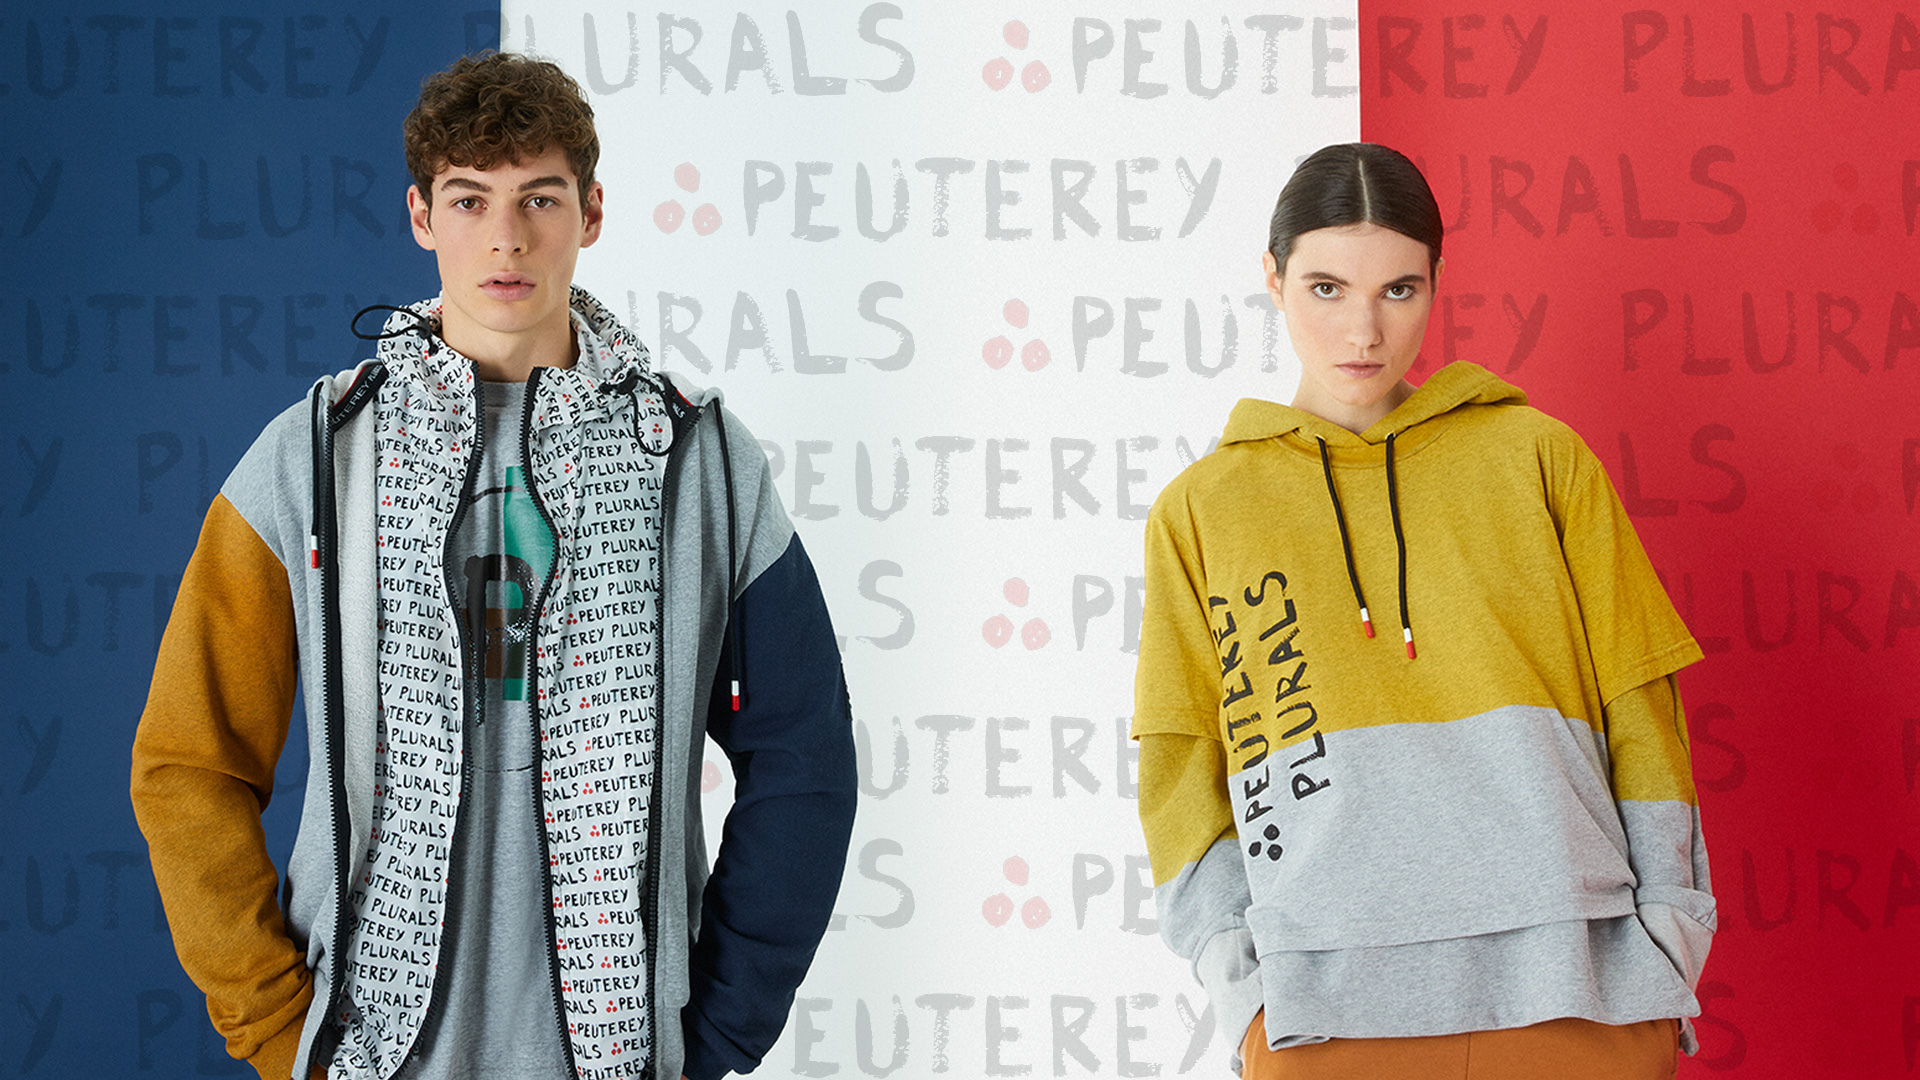 Peuterey Plurals: young, cool, creative and urban | Peuterey